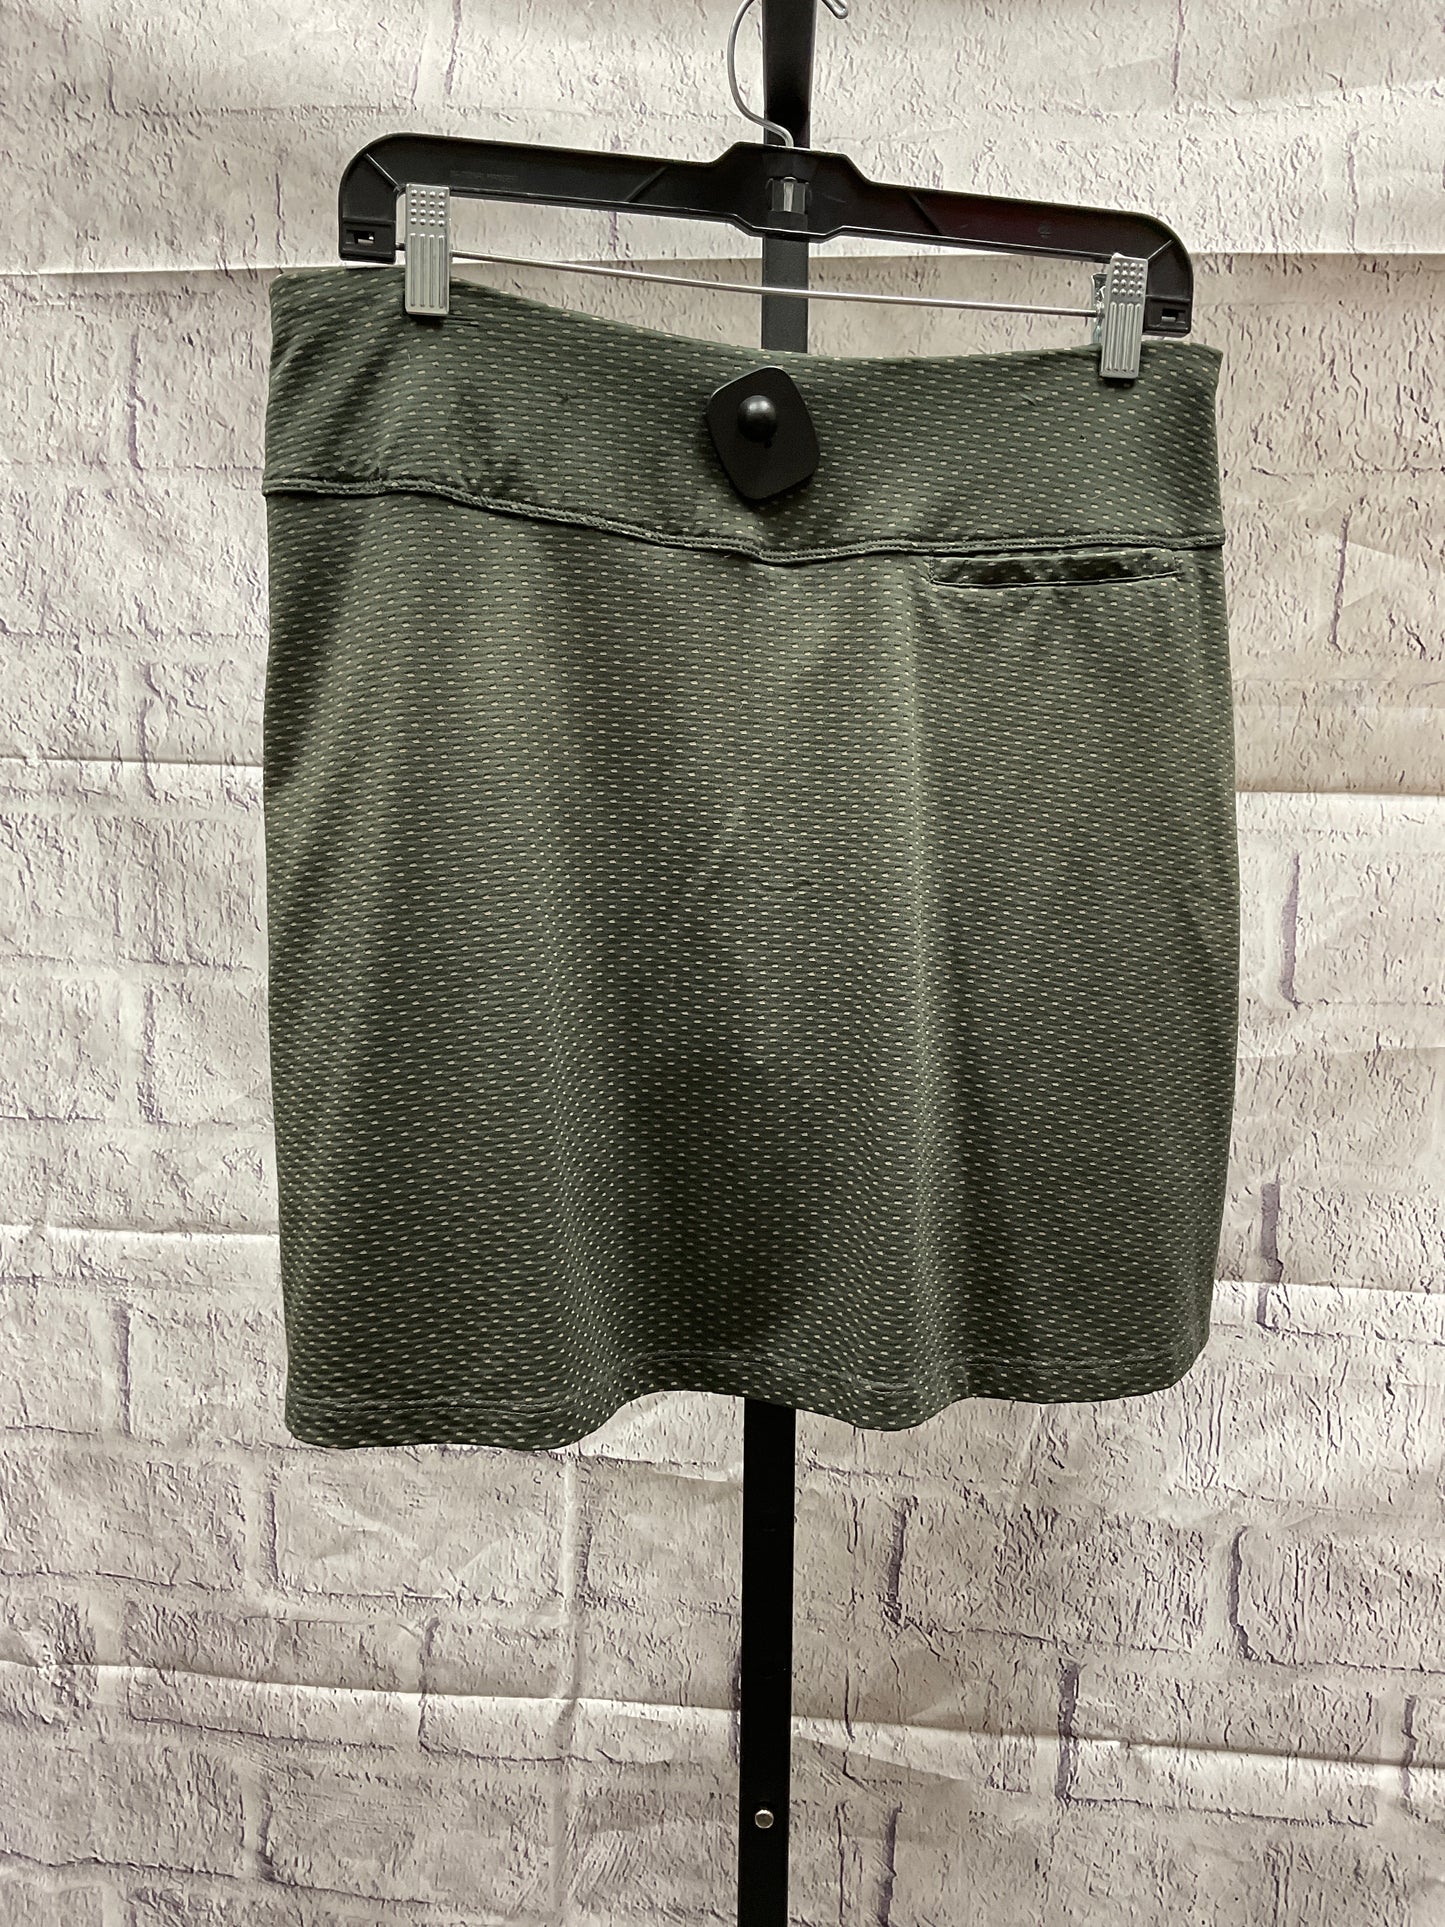 Athletic Skort By Tail  Size: S